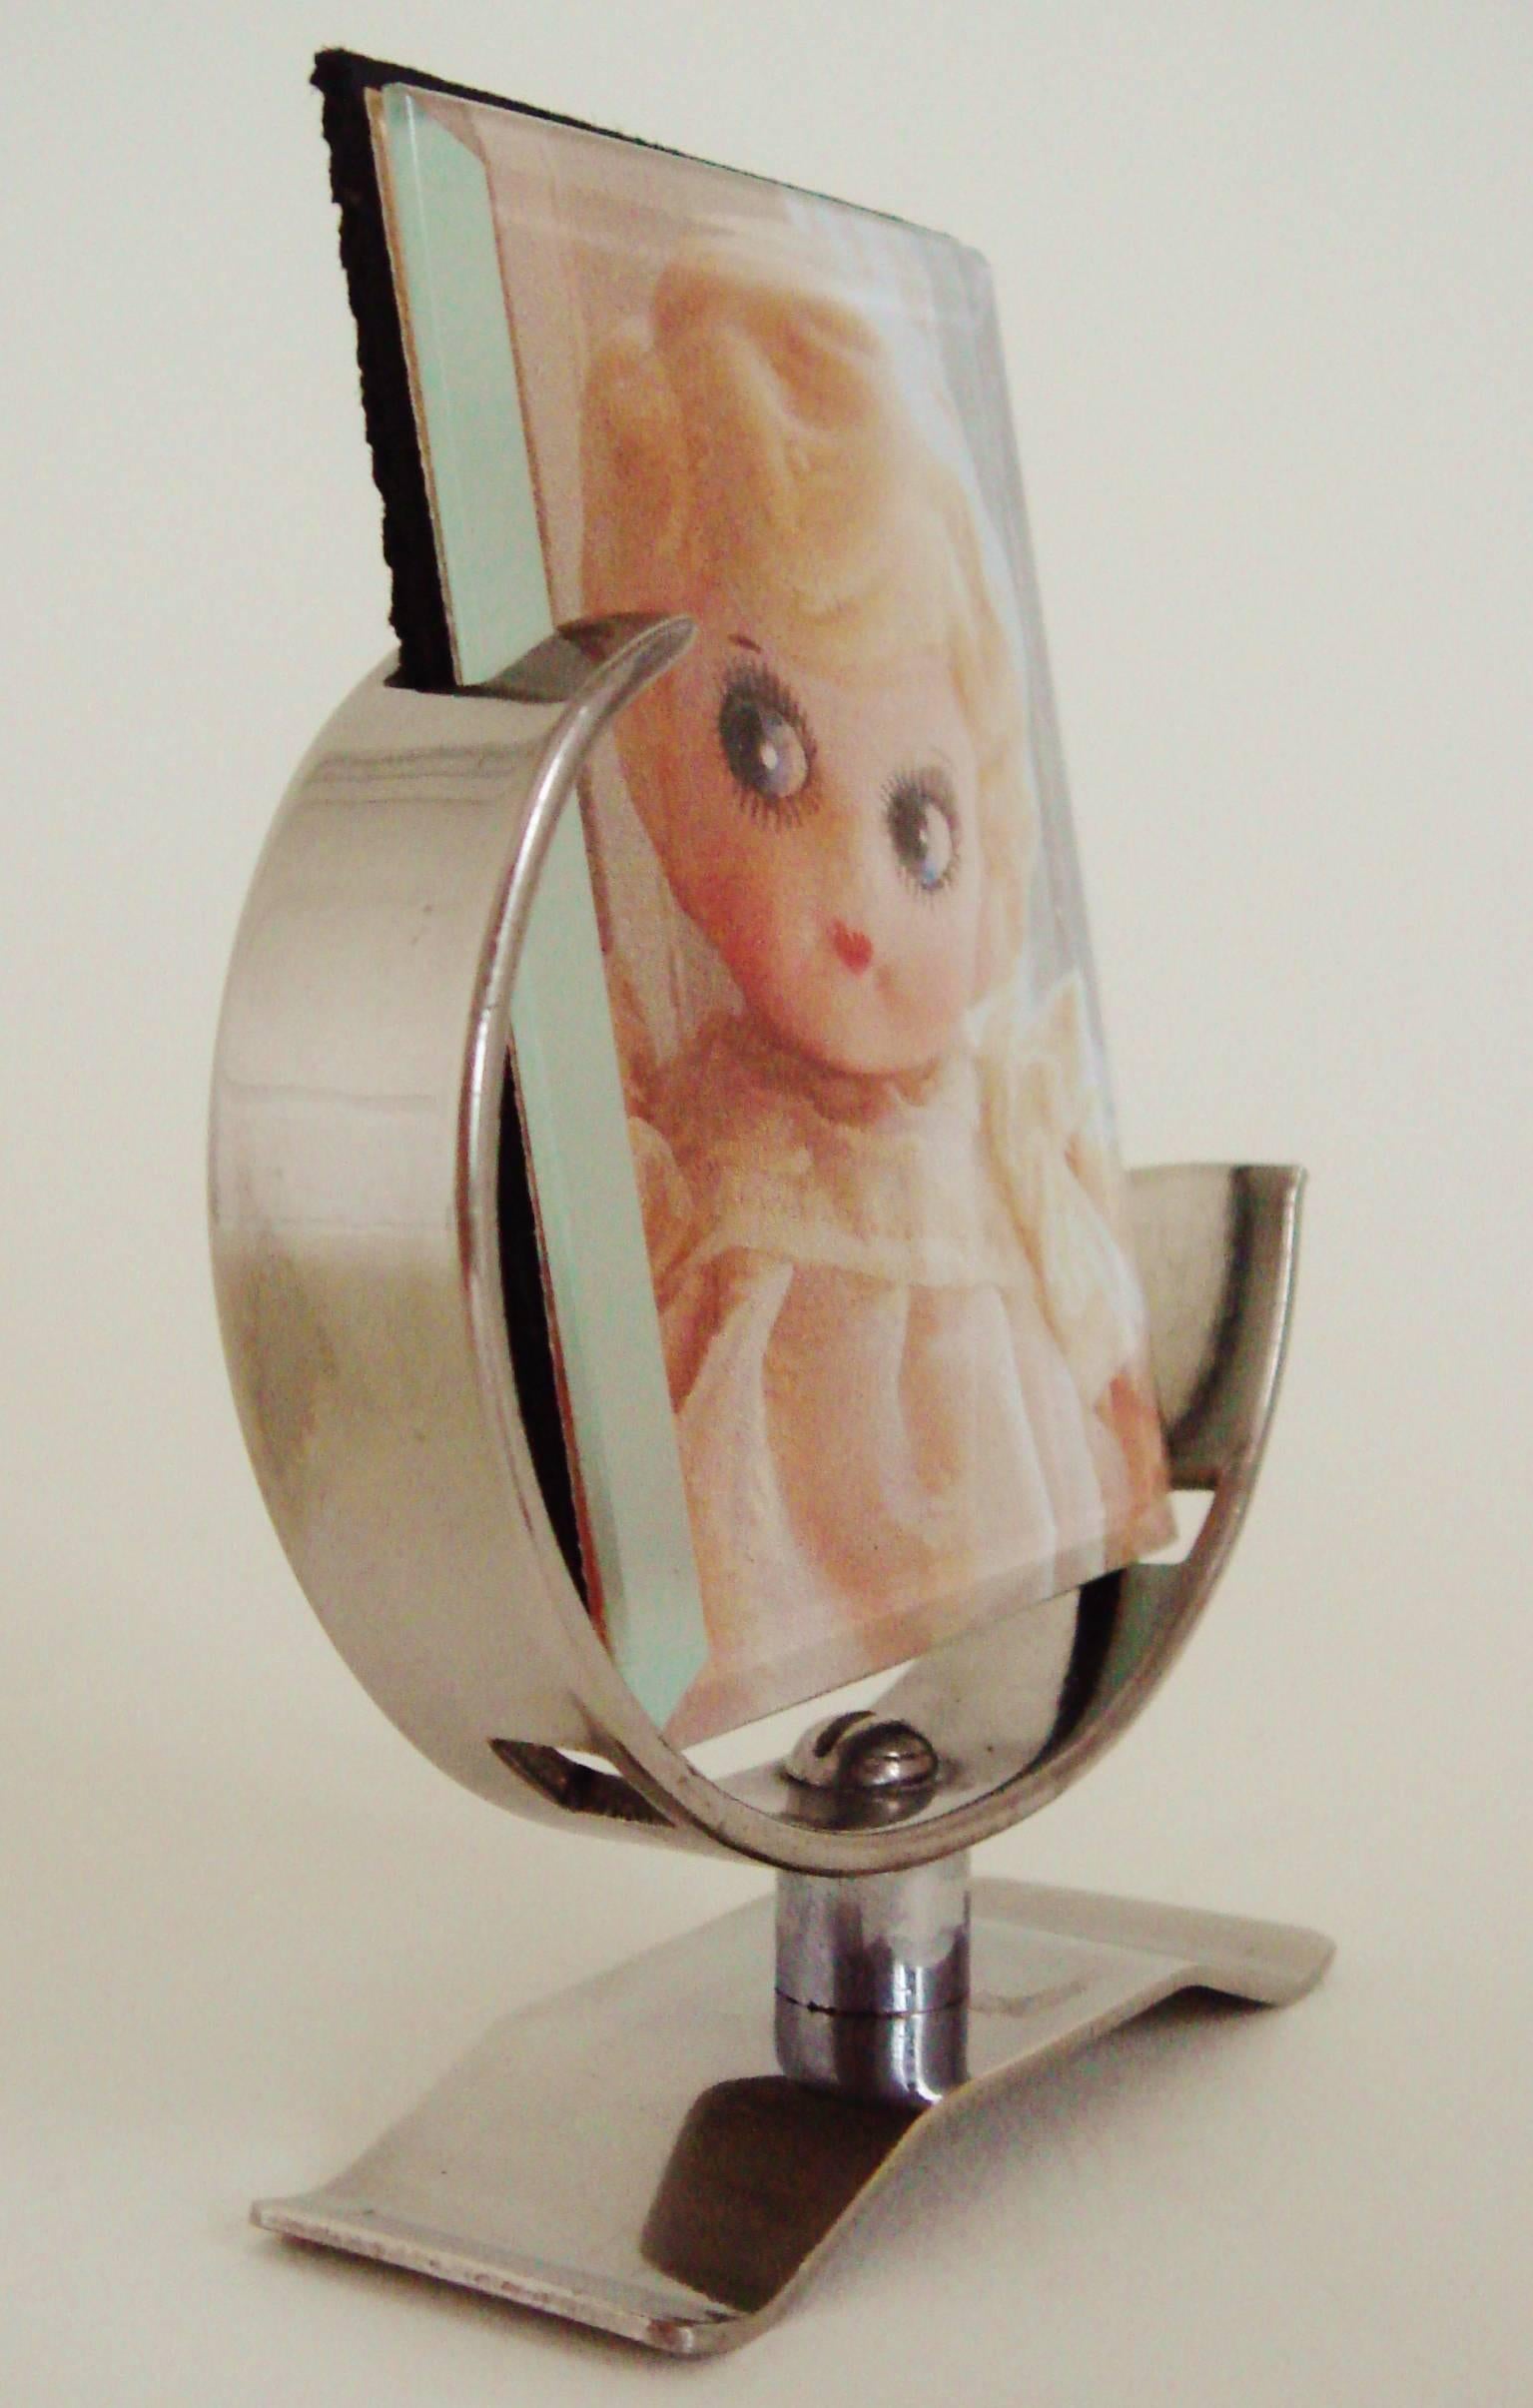 This very rare and fabulous pair of miniature German Art Deco nickel-plated picture frames were made to be in scale with the dolls of the period. They are book matched and notched so that the image is correctly angled back. The original glass in